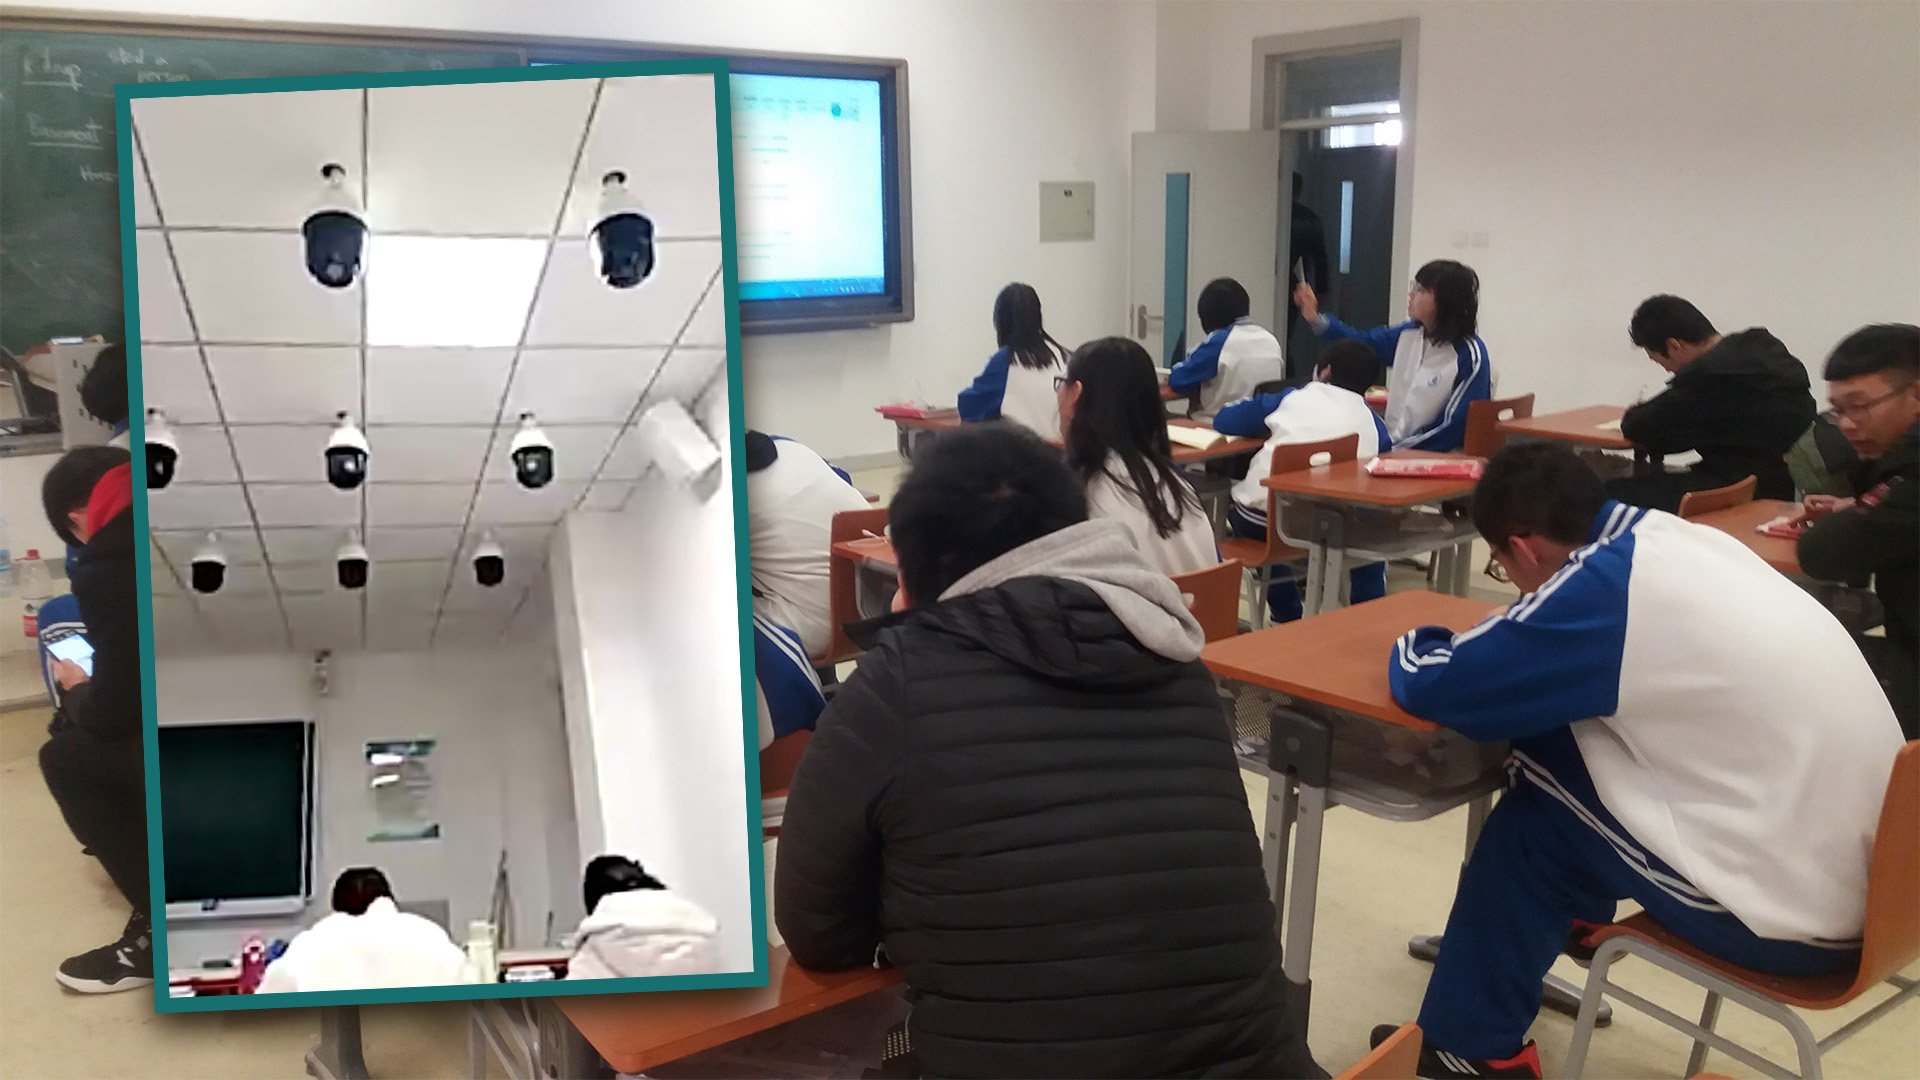 A university in China that has installed a large number of surveillance cameras in a lecture room as part of its digital teaching process has stirred a debate about privacy on mainland social media. Photo: SCMP composite/Shutterstock/Baidu